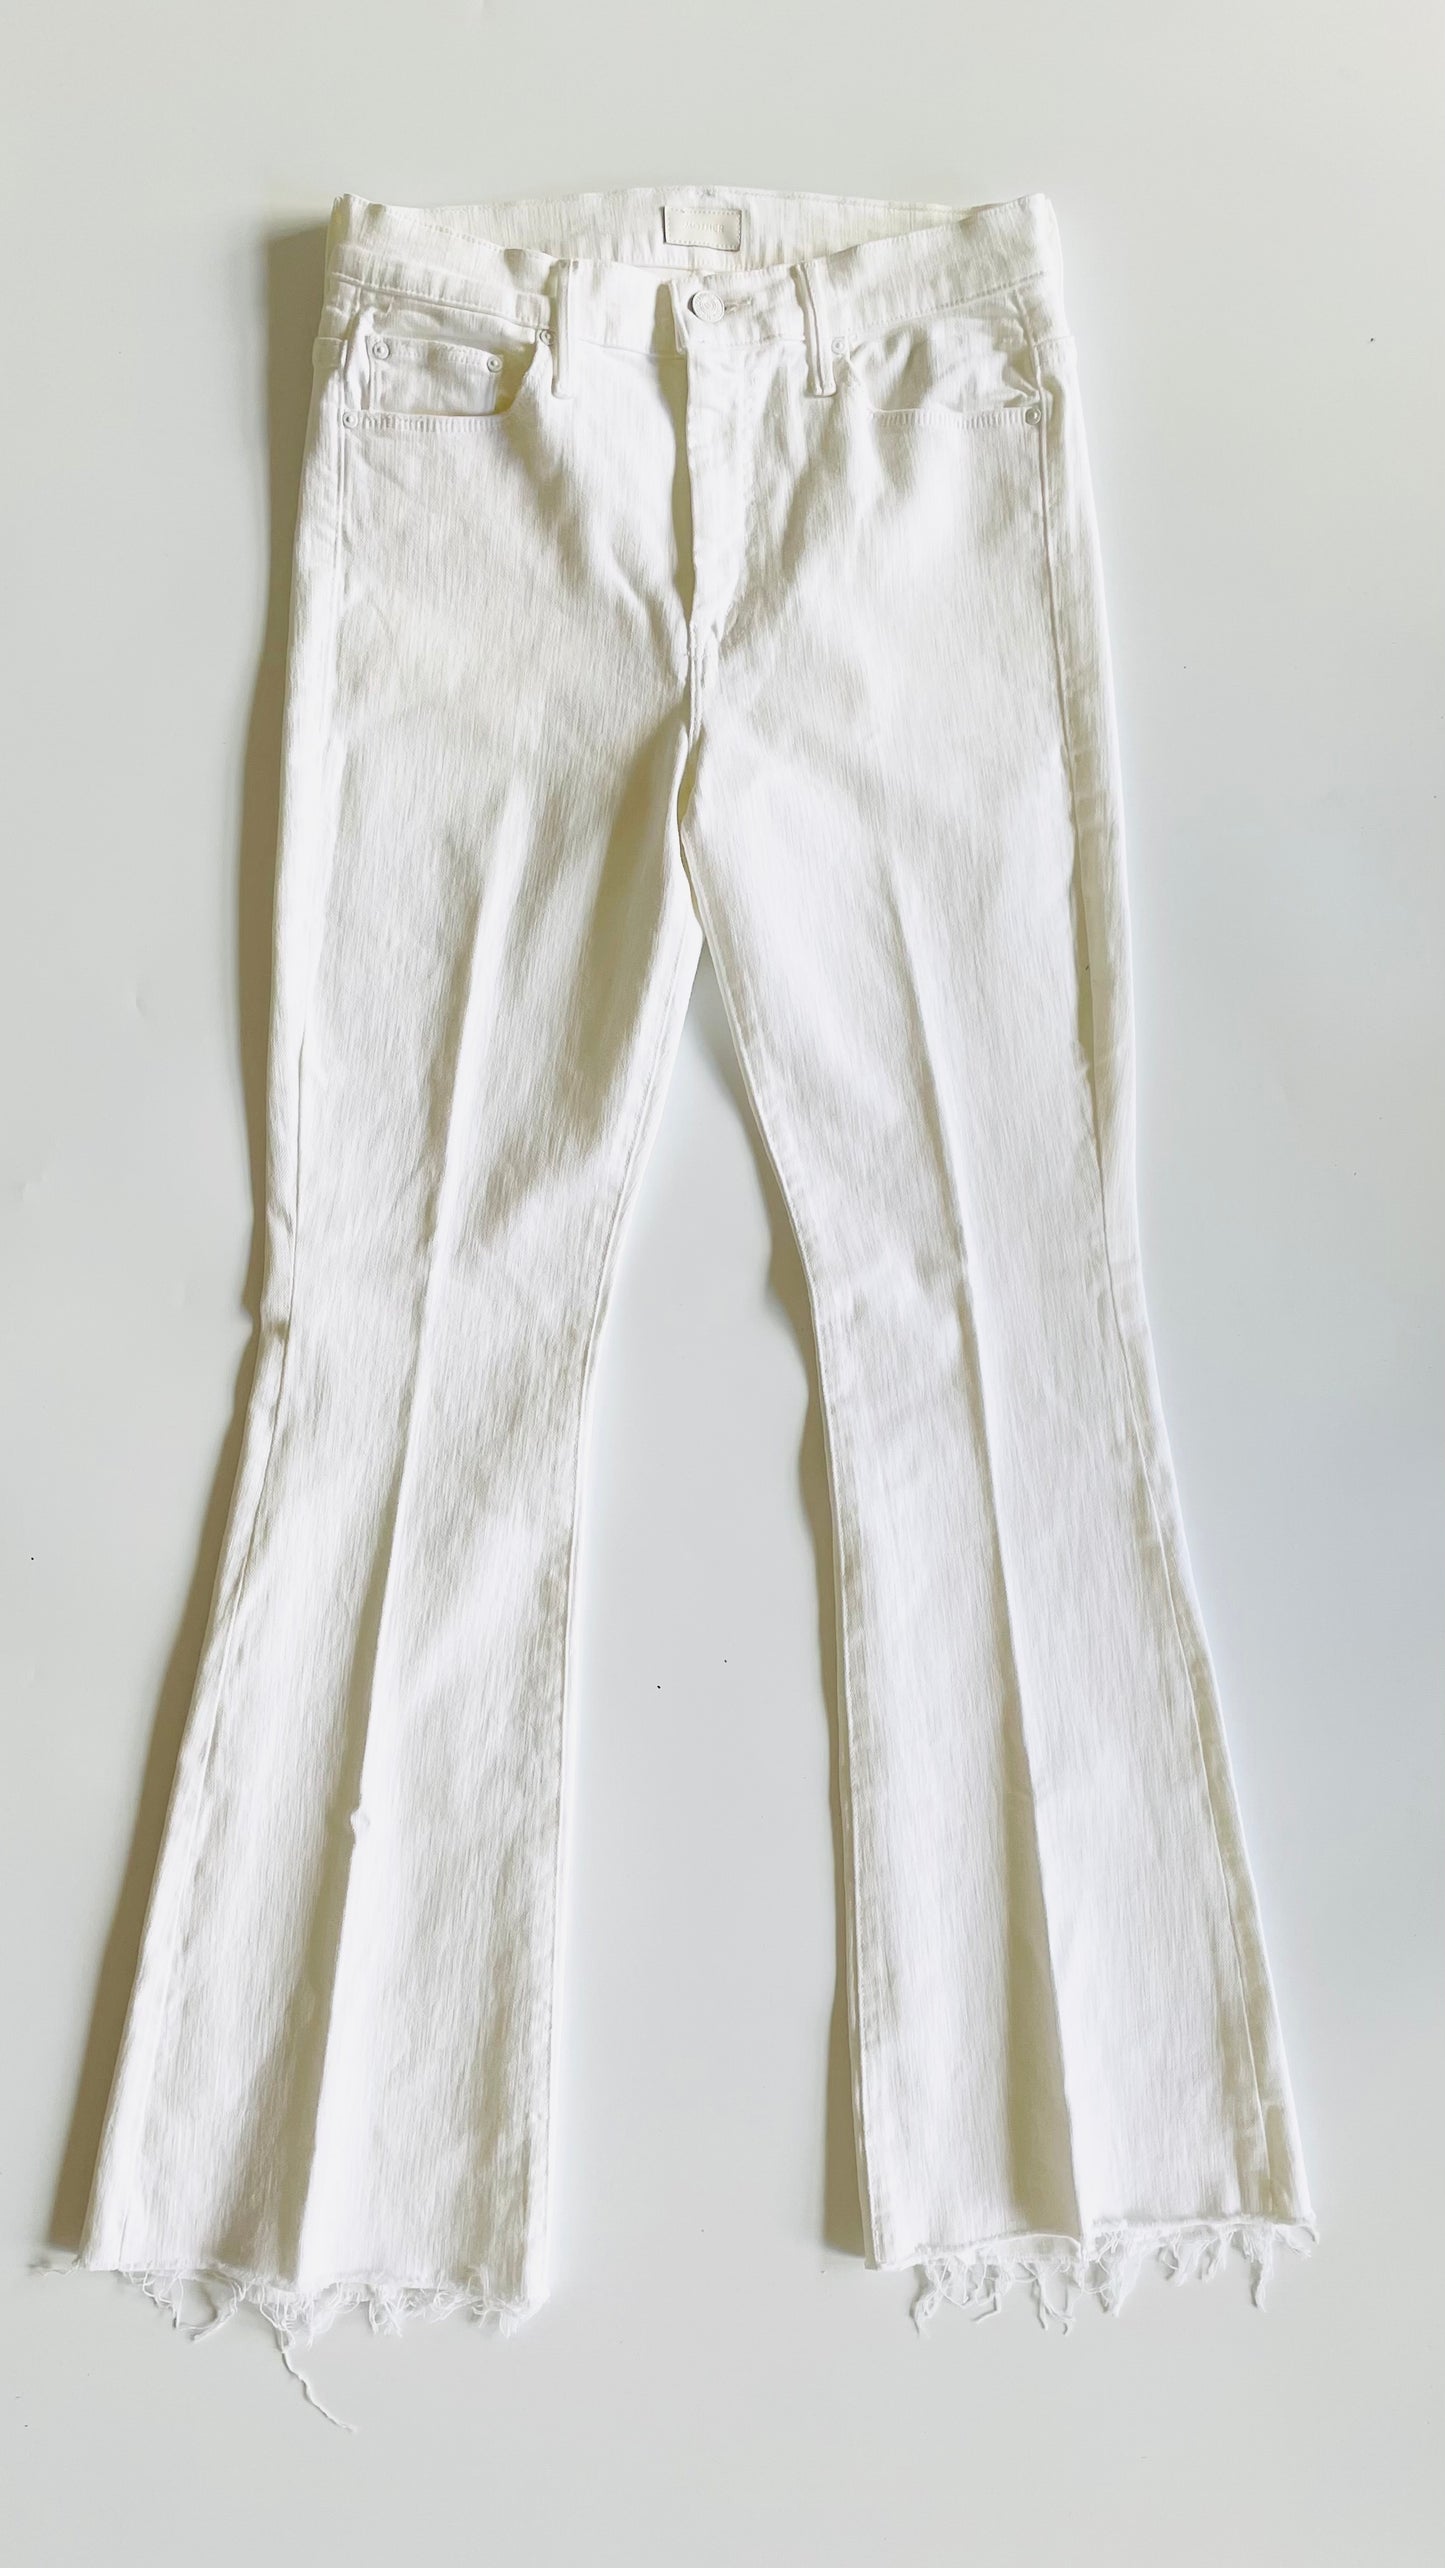 Pre-Loved MOTHER denim white flared jeans NWOT - Size 29 x 32